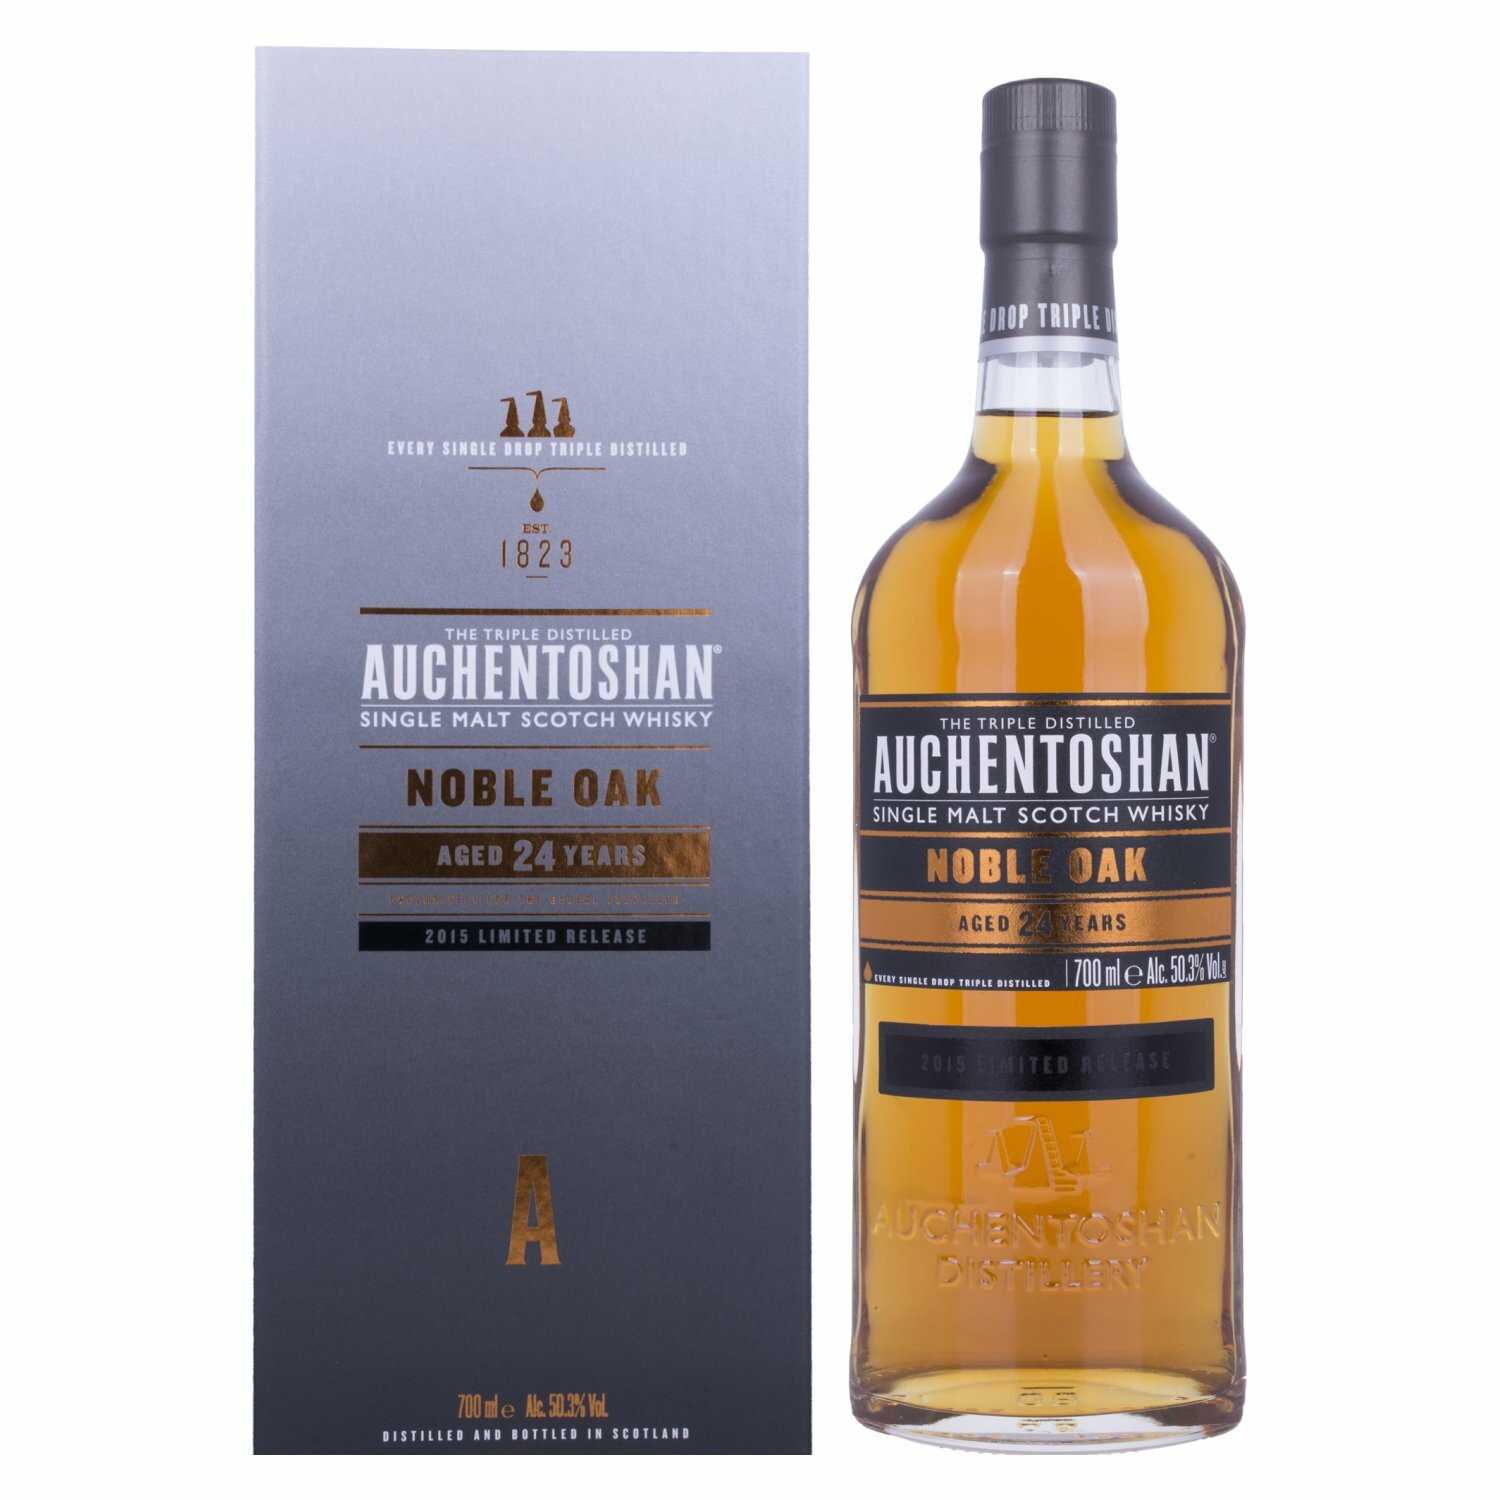 Auchentoshan 24 Years Old NOBLE OAK Limited Release 2015 50,3% Vol. 0,7l in Giftbox